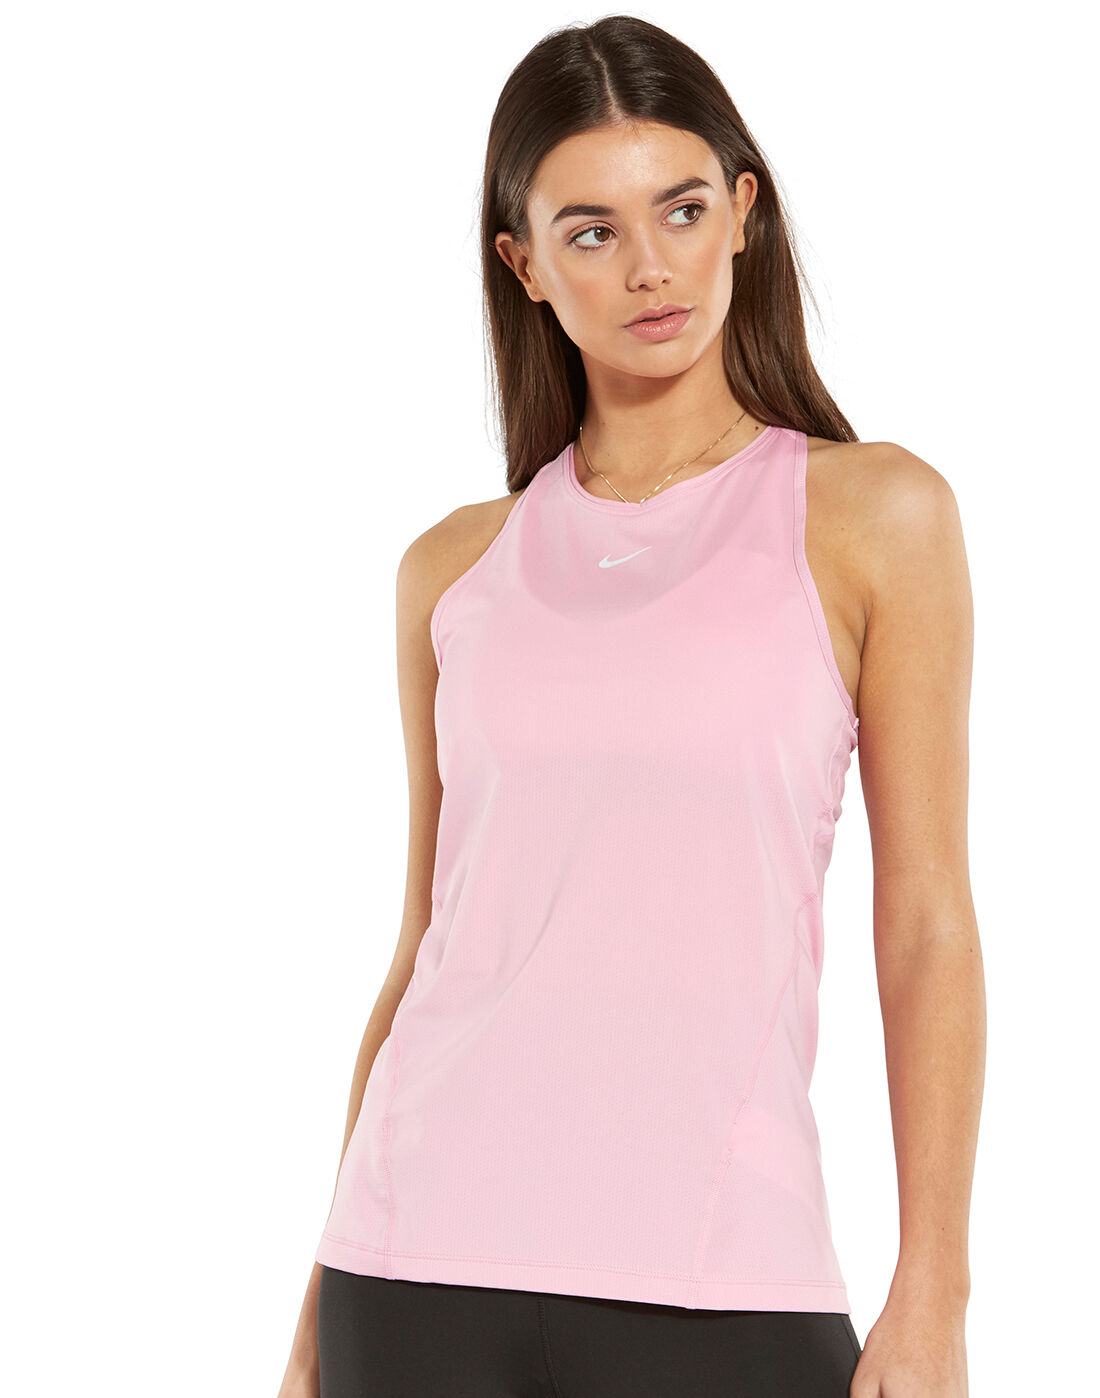 Women's Pink Nike All-Over Mesh Tank 